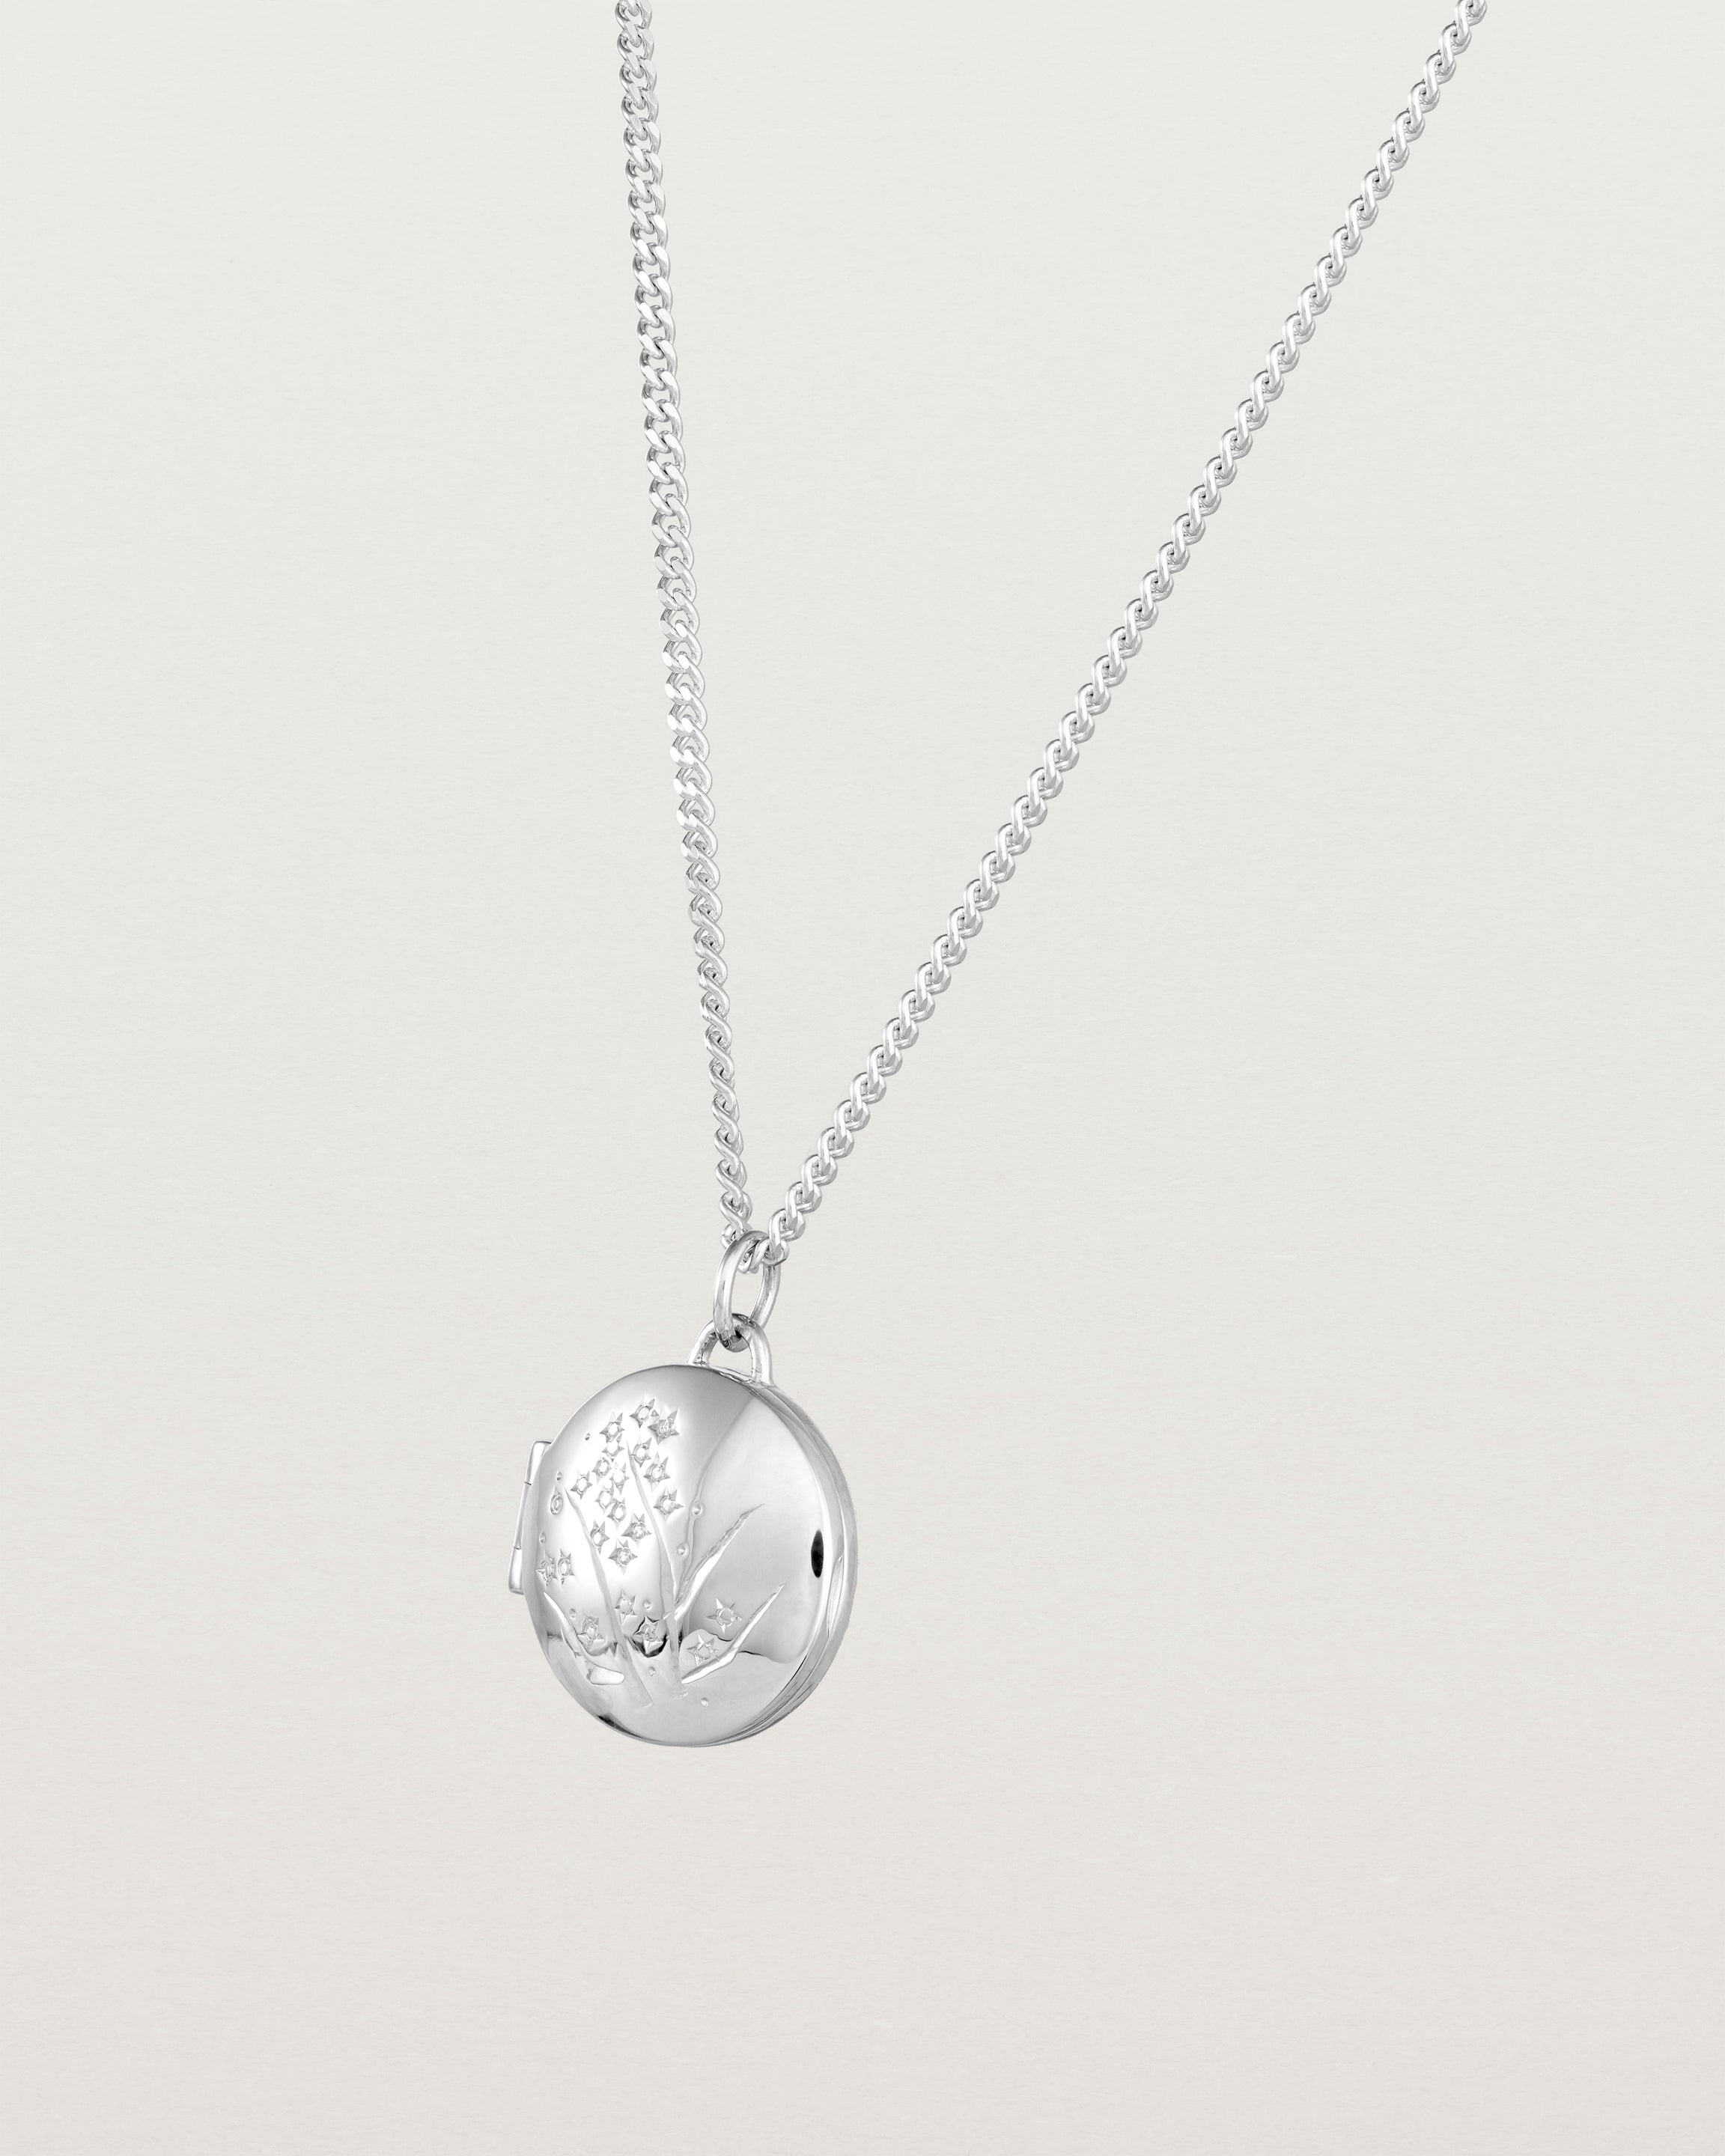 Angled view of the Golden Wattle Locket in sterling silver.